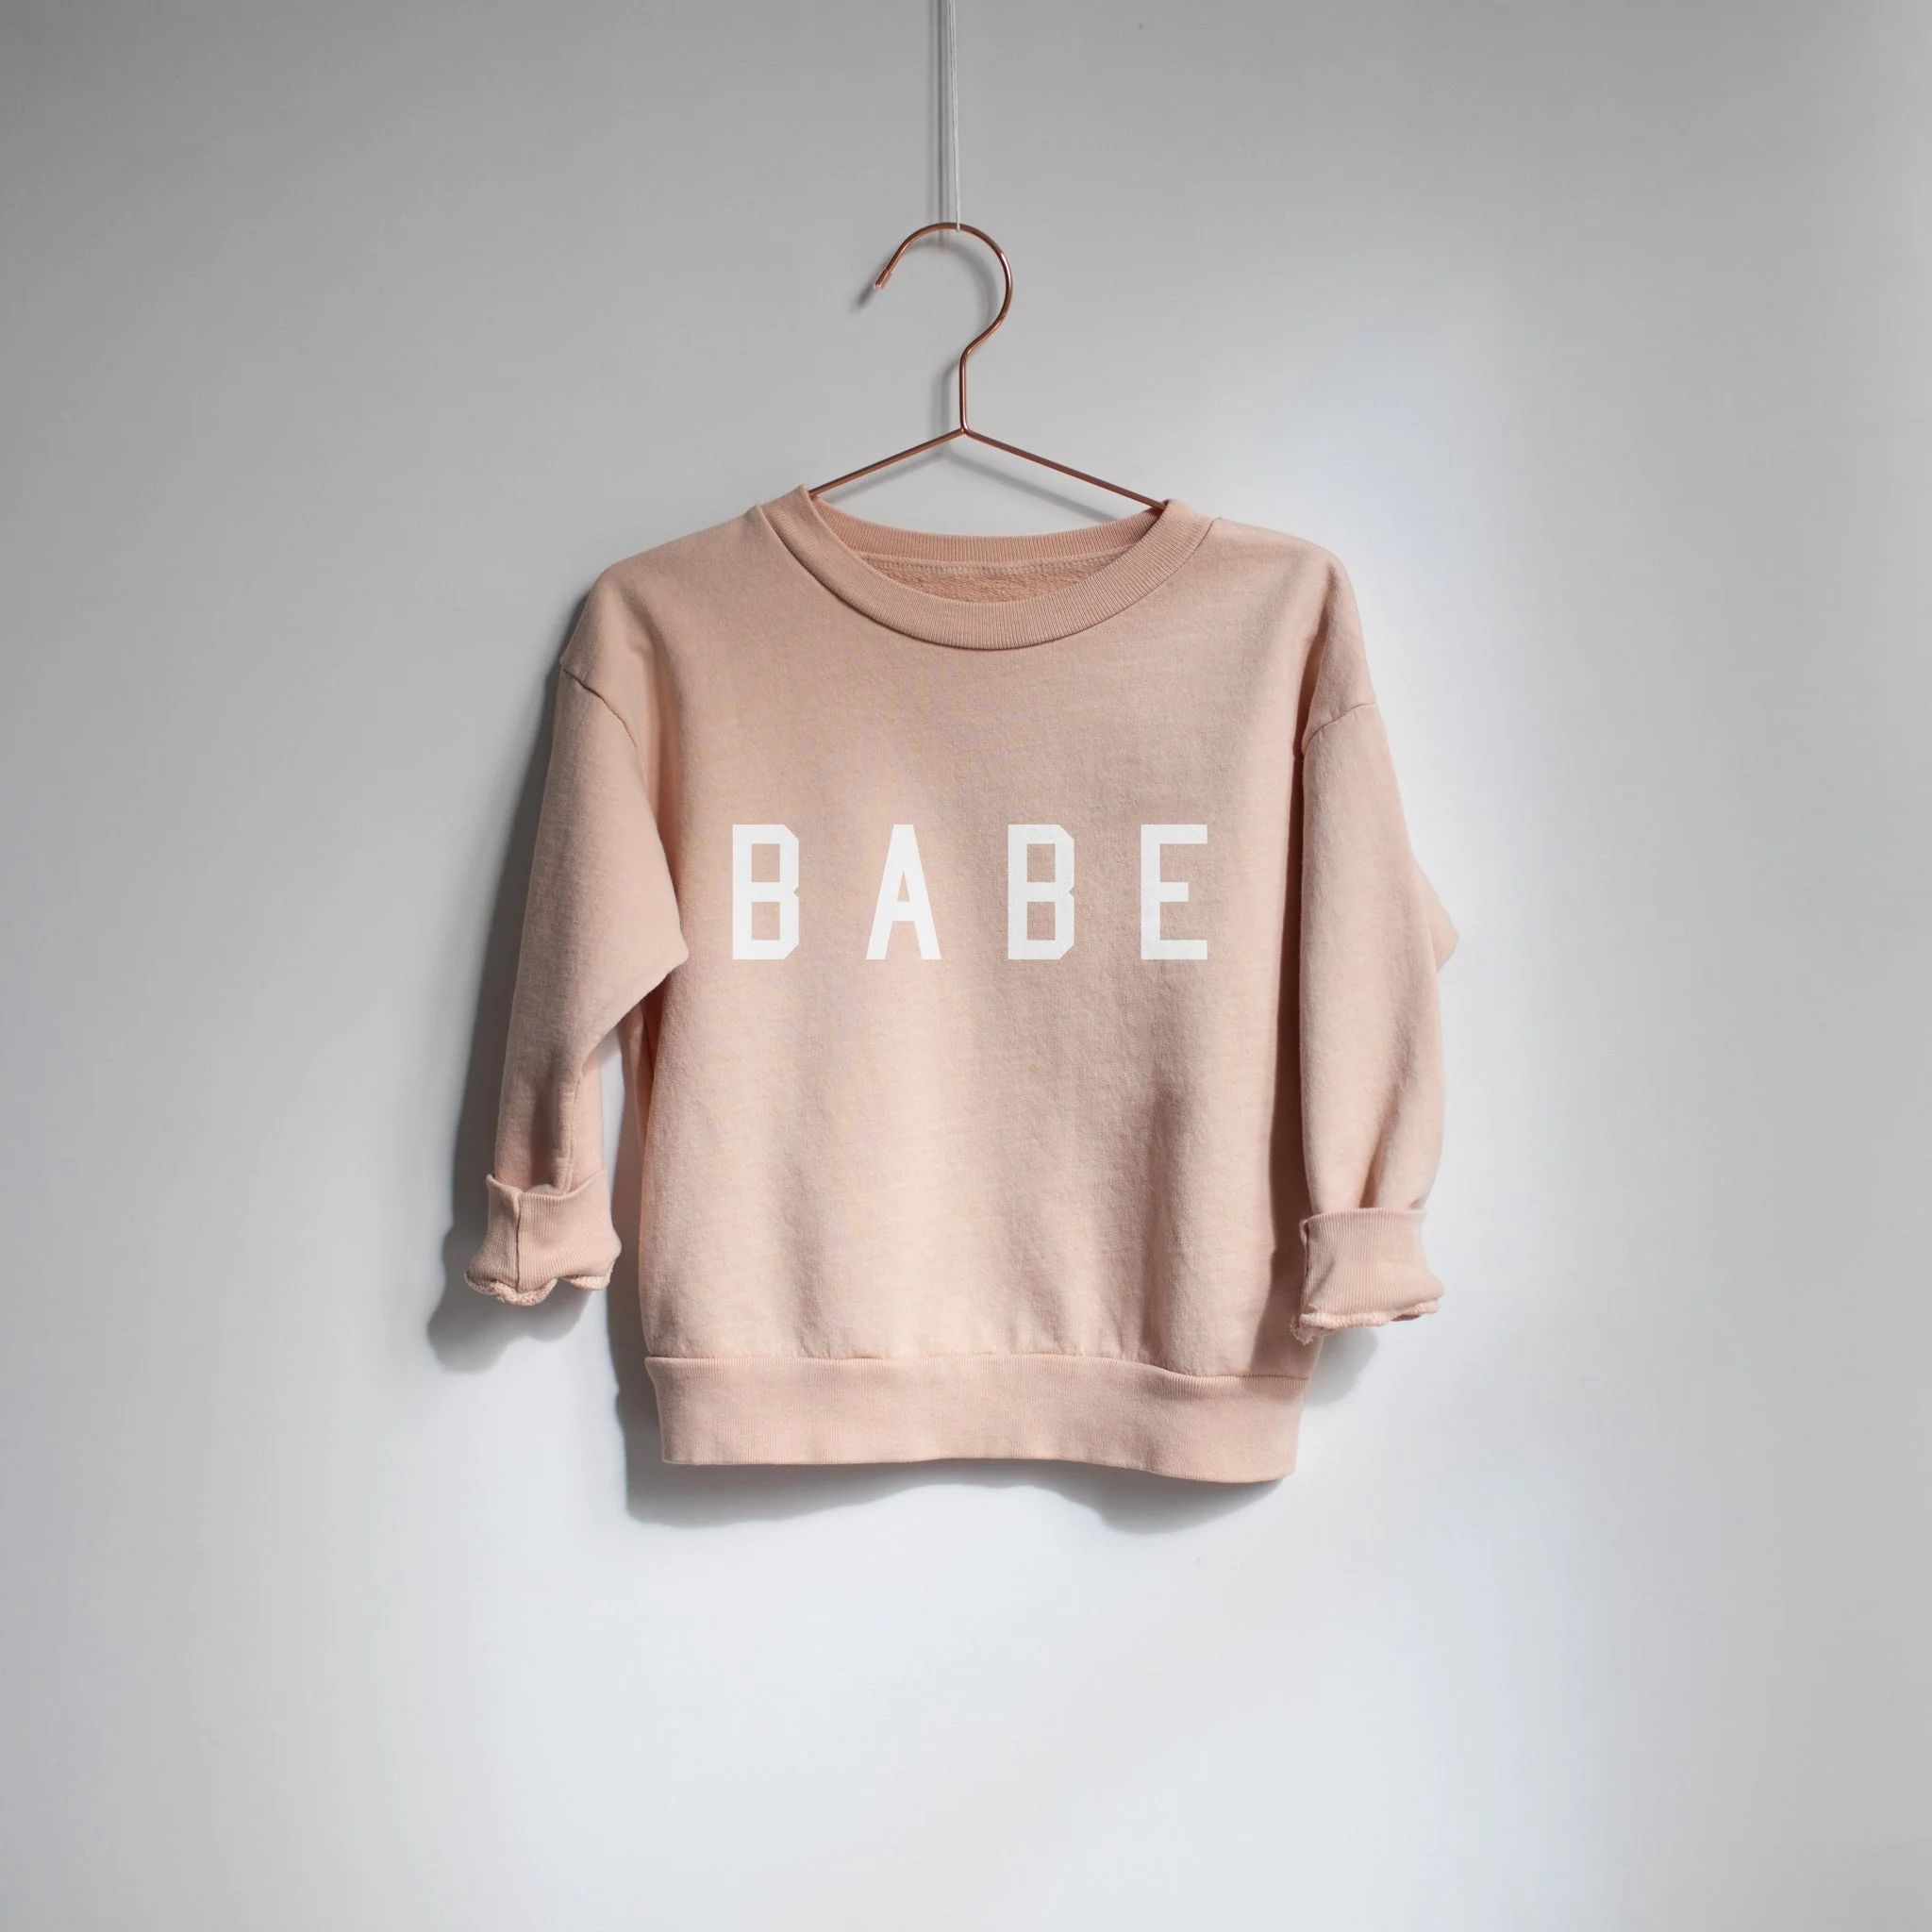 Kids Babe Everyday Sweatshirt in Rose Color | Ford and Wyatt